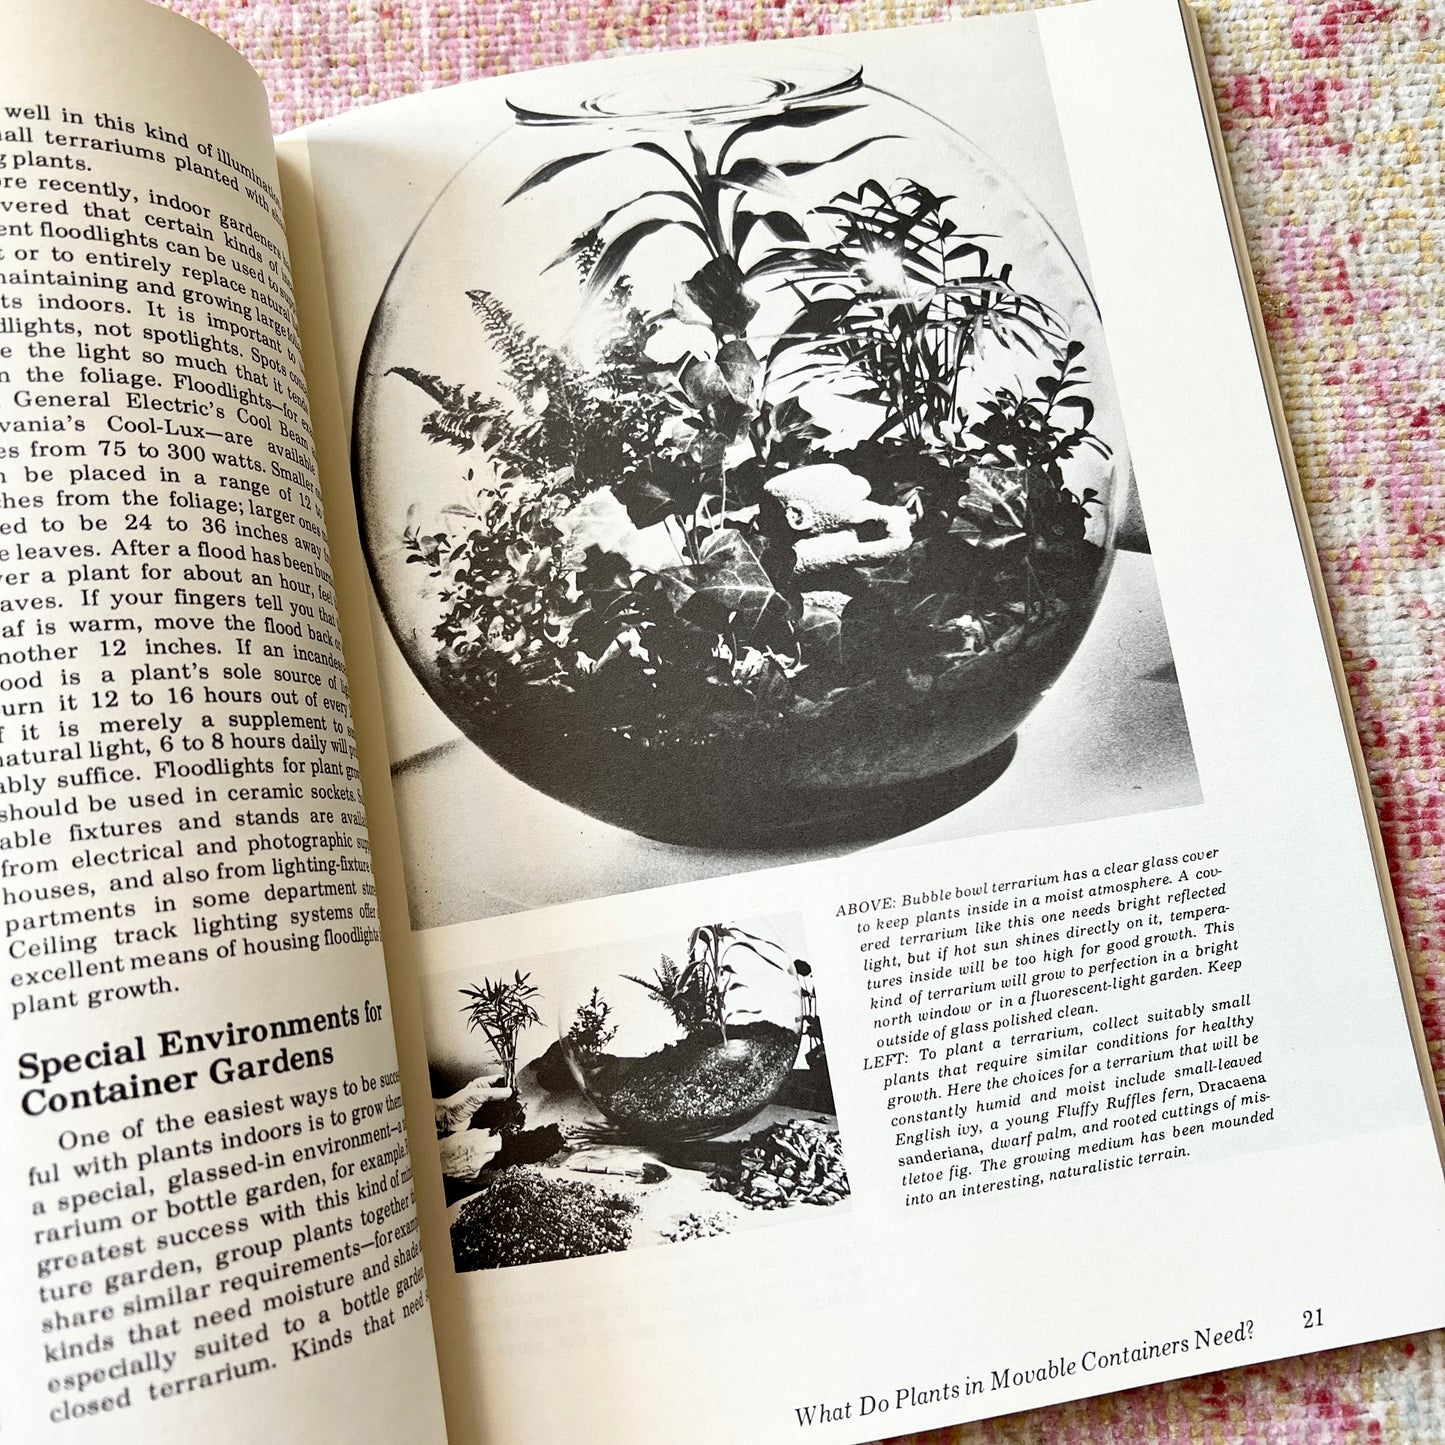 [AS-IS] 1975 "Gardening in Containers" Paperback Book